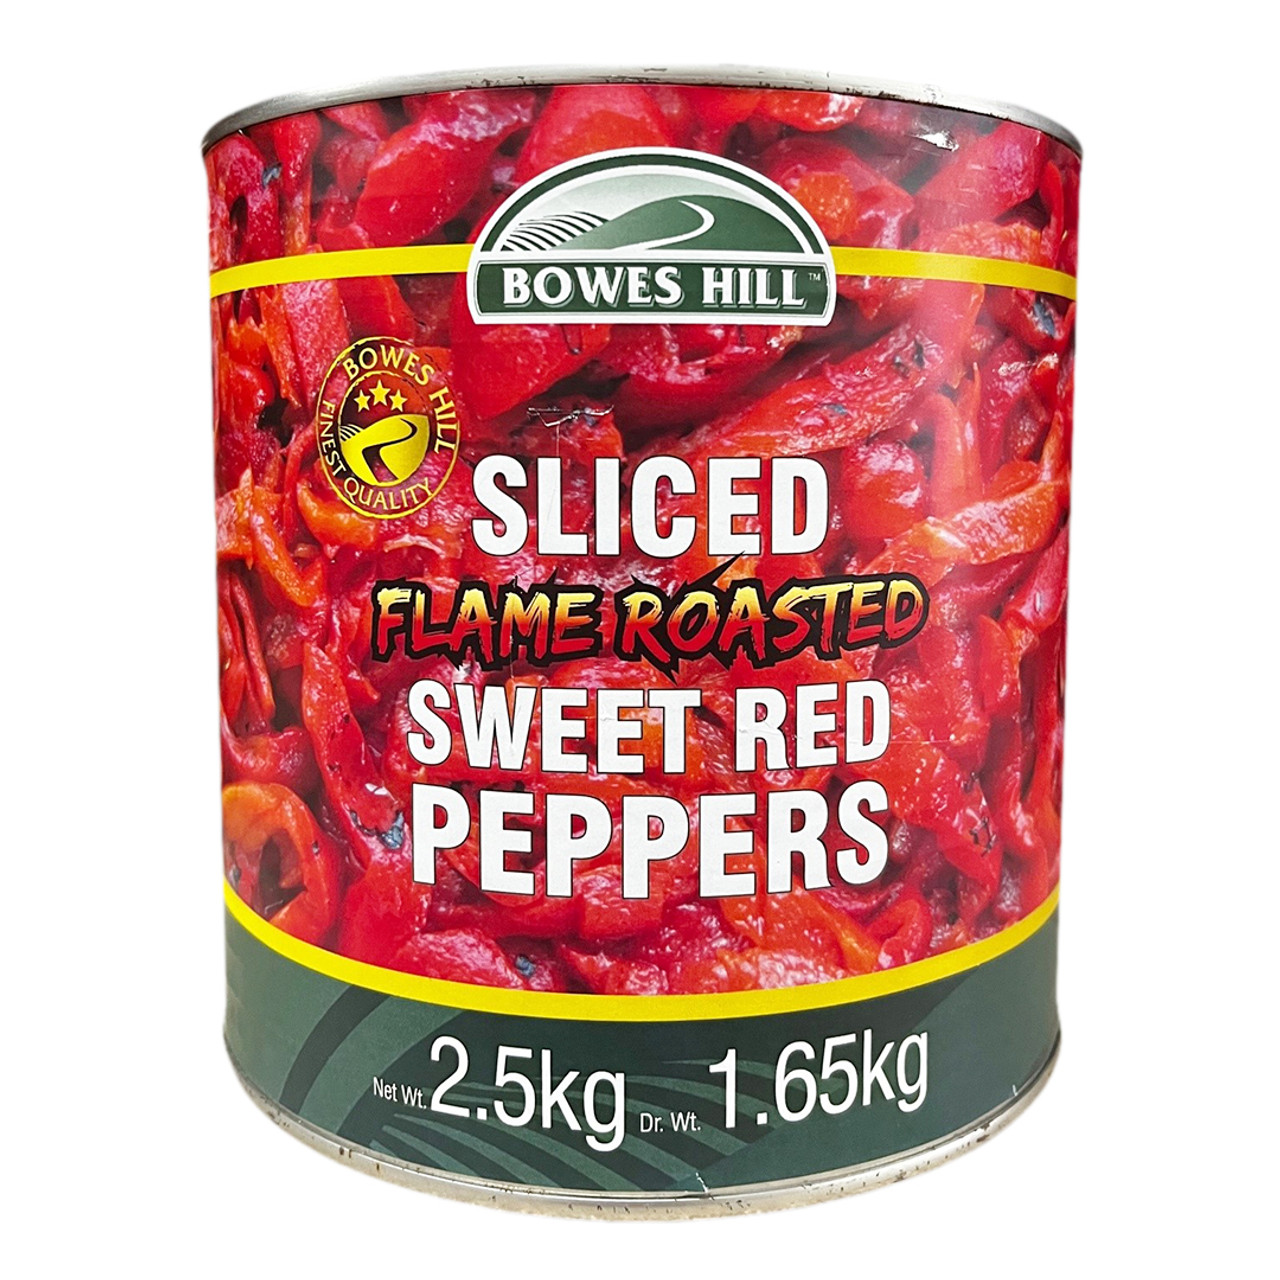 BOWES HILL - SLICED FLAME ROASTED SWEET RED PEPPERS - 2.5KG